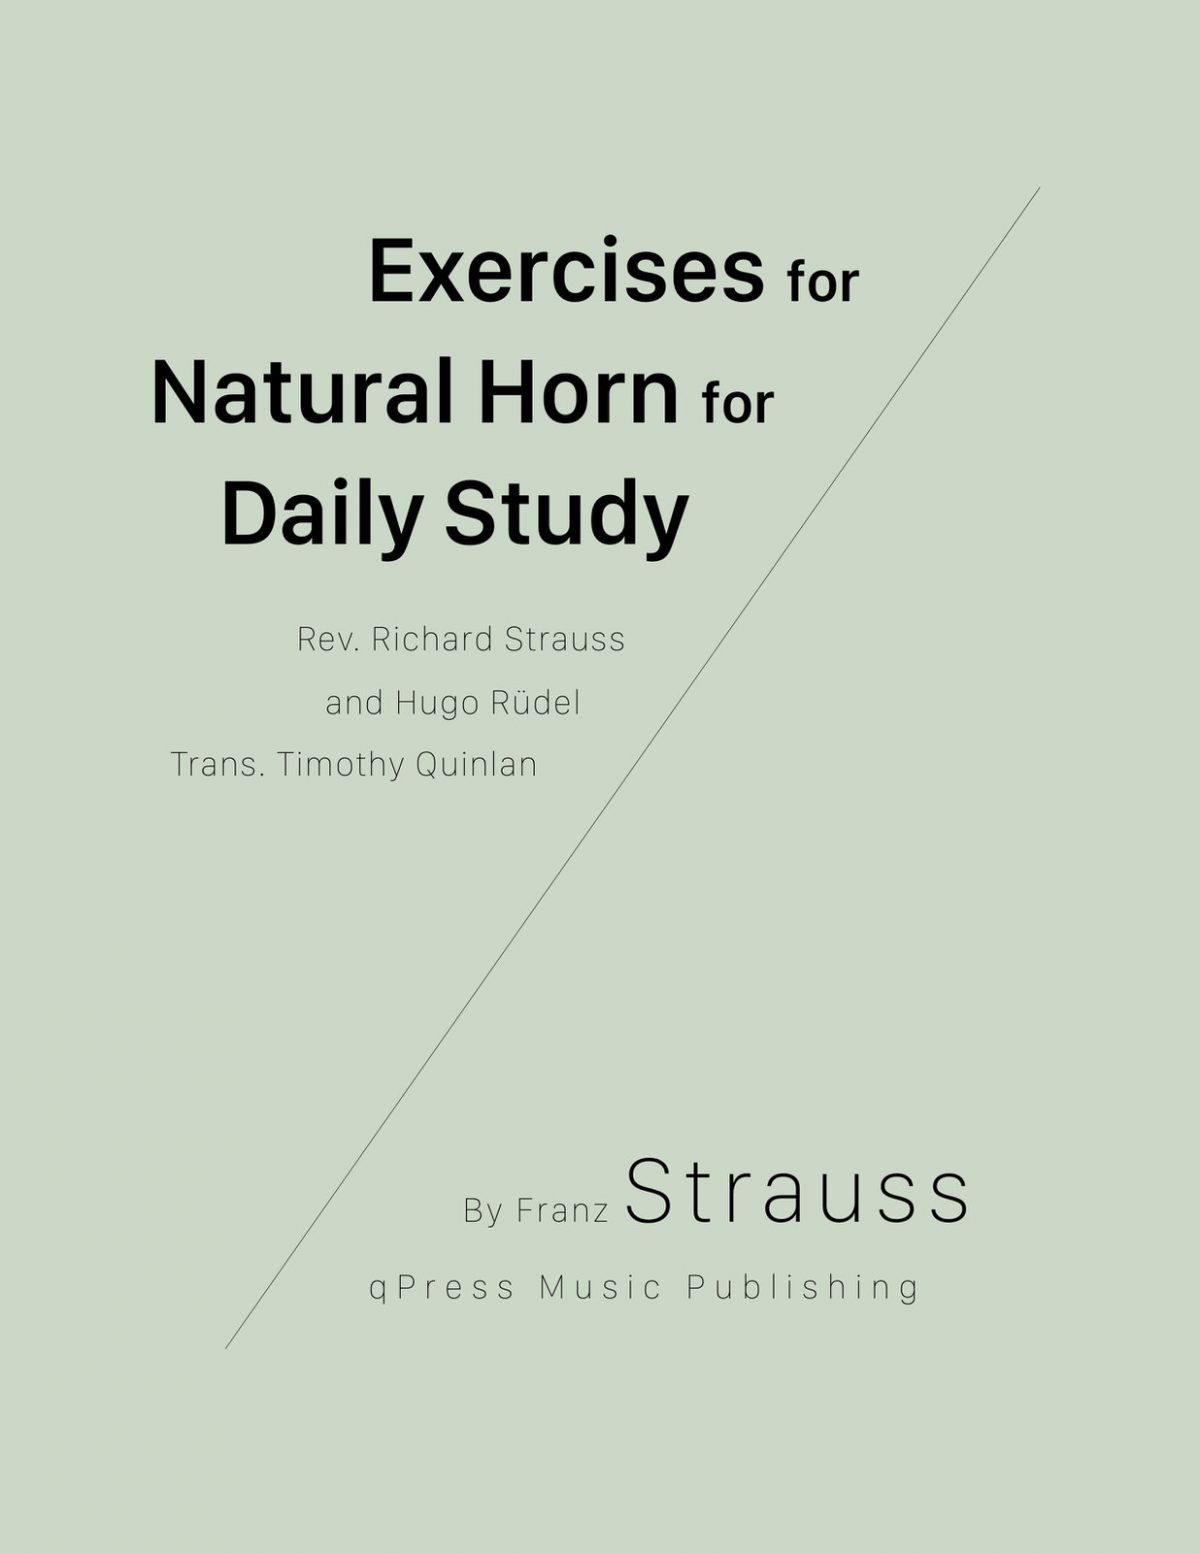 Exercises for Natural Horn for Daily Study